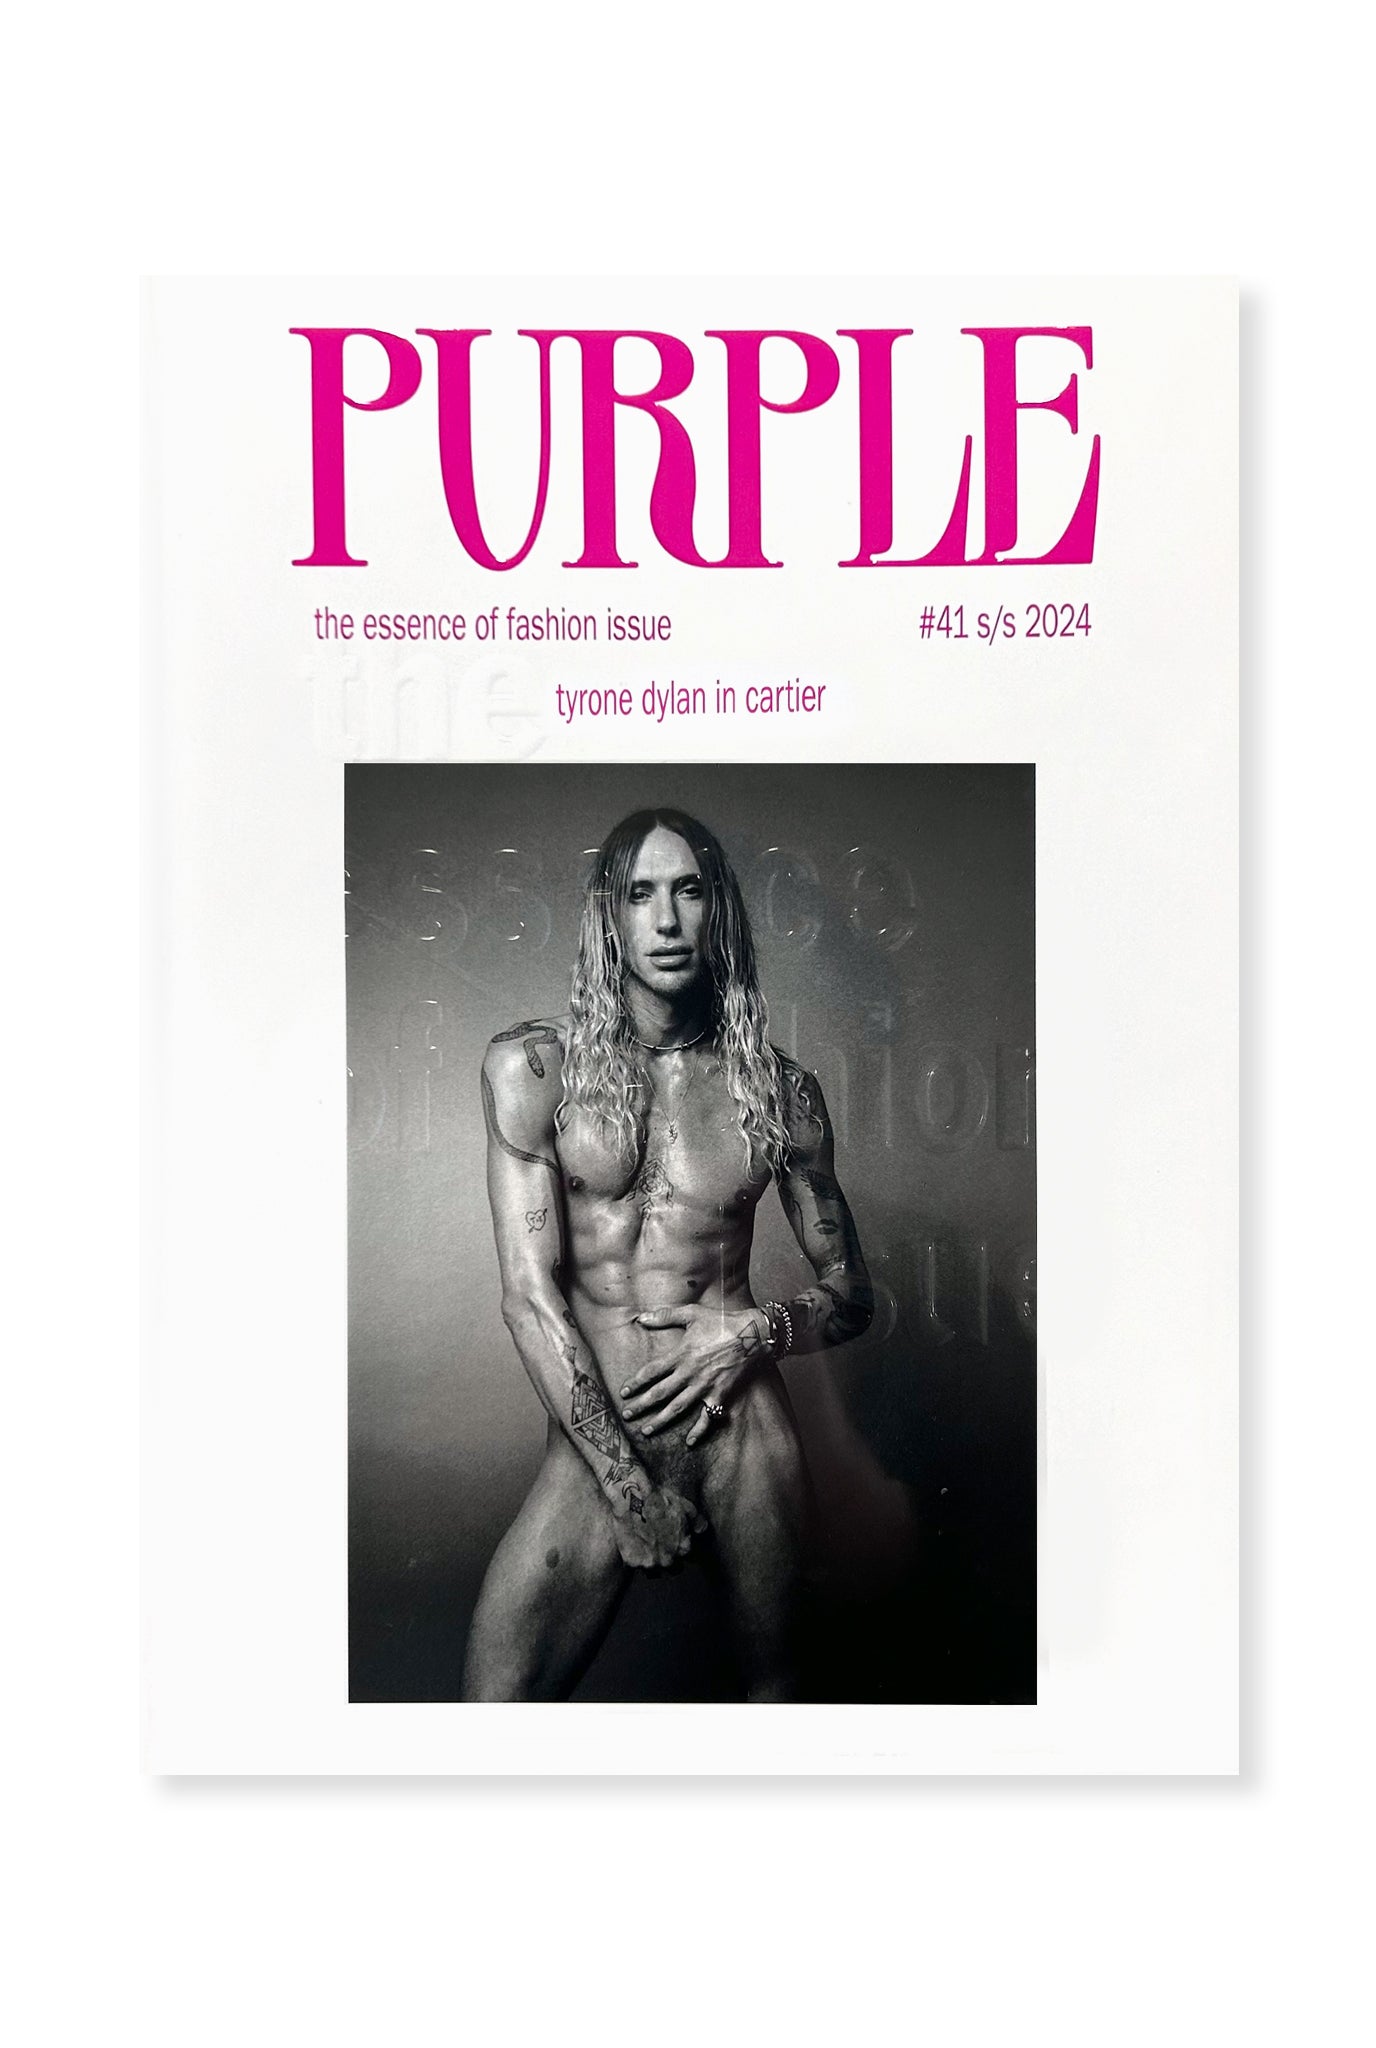 Purple, Issue 41 - The Essence of Fashion Issue